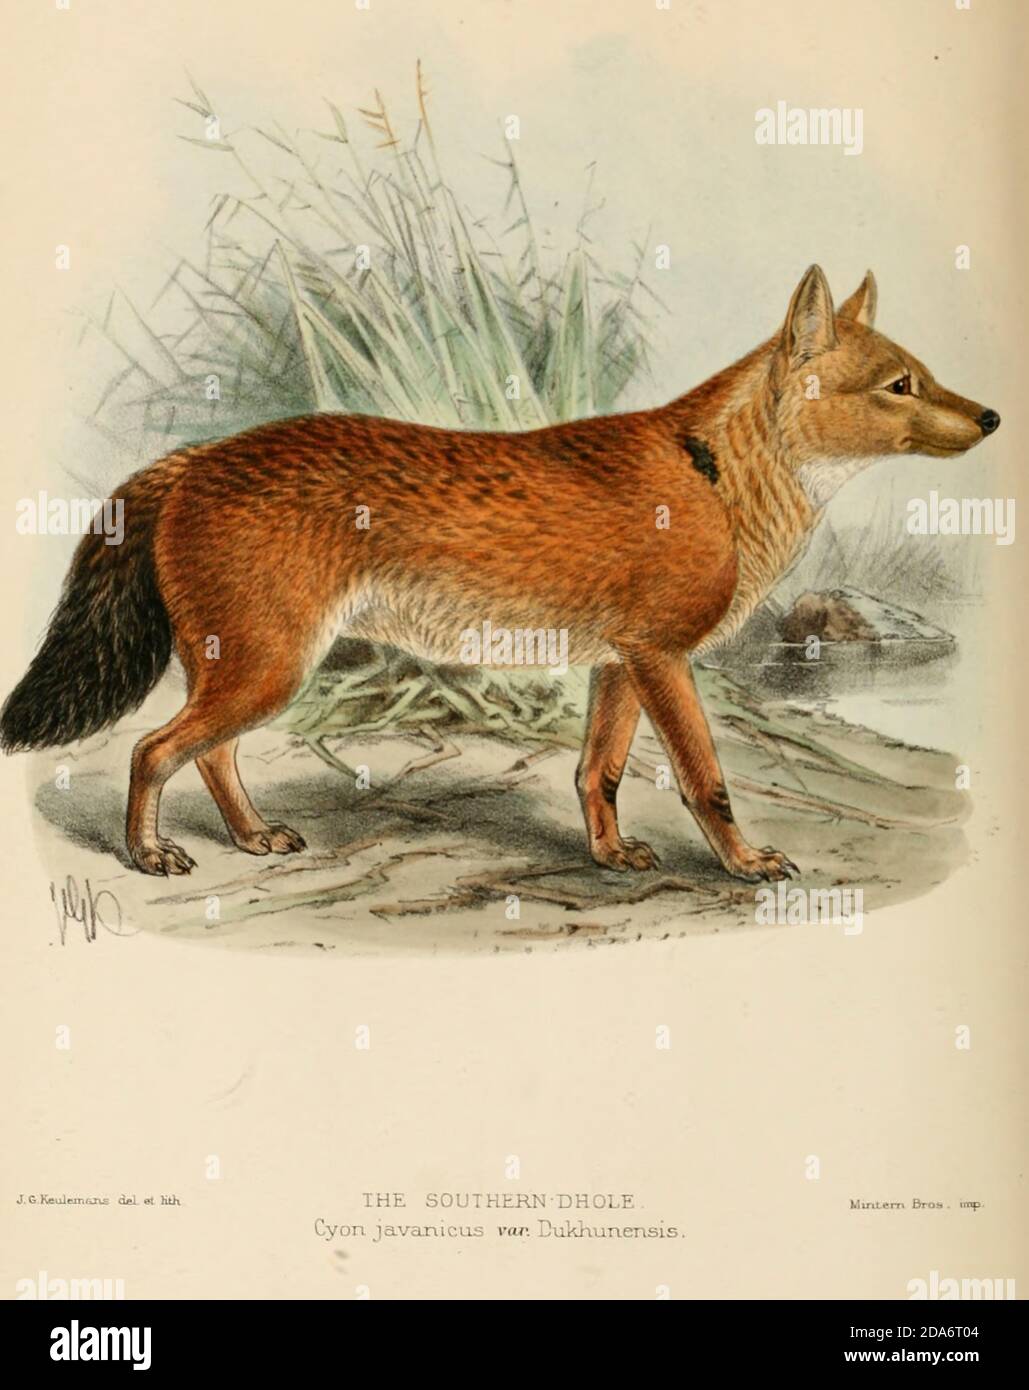 The Sumatran dhole (Cuon alpinus sumatrensis [Cyon javanicus var dukhunensis]) also known as the Sumatran wild dog is a subspecies of dhole native to the Indonesian islands of Sumatra. From the Book Dogs, Jackals, Wolves and Foxes A Monograph of The Canidae [from Latin, canis, 'dog') is a biological family of dog-like carnivorans. A member of this family is called a canid] By George Mivart, F.R.S. with woodcuts and 45 coloured plates drawn from nature by J. G. Keulemans and Hand-Coloured. Published by R. H. Porter, London, 1890 Stock Photo